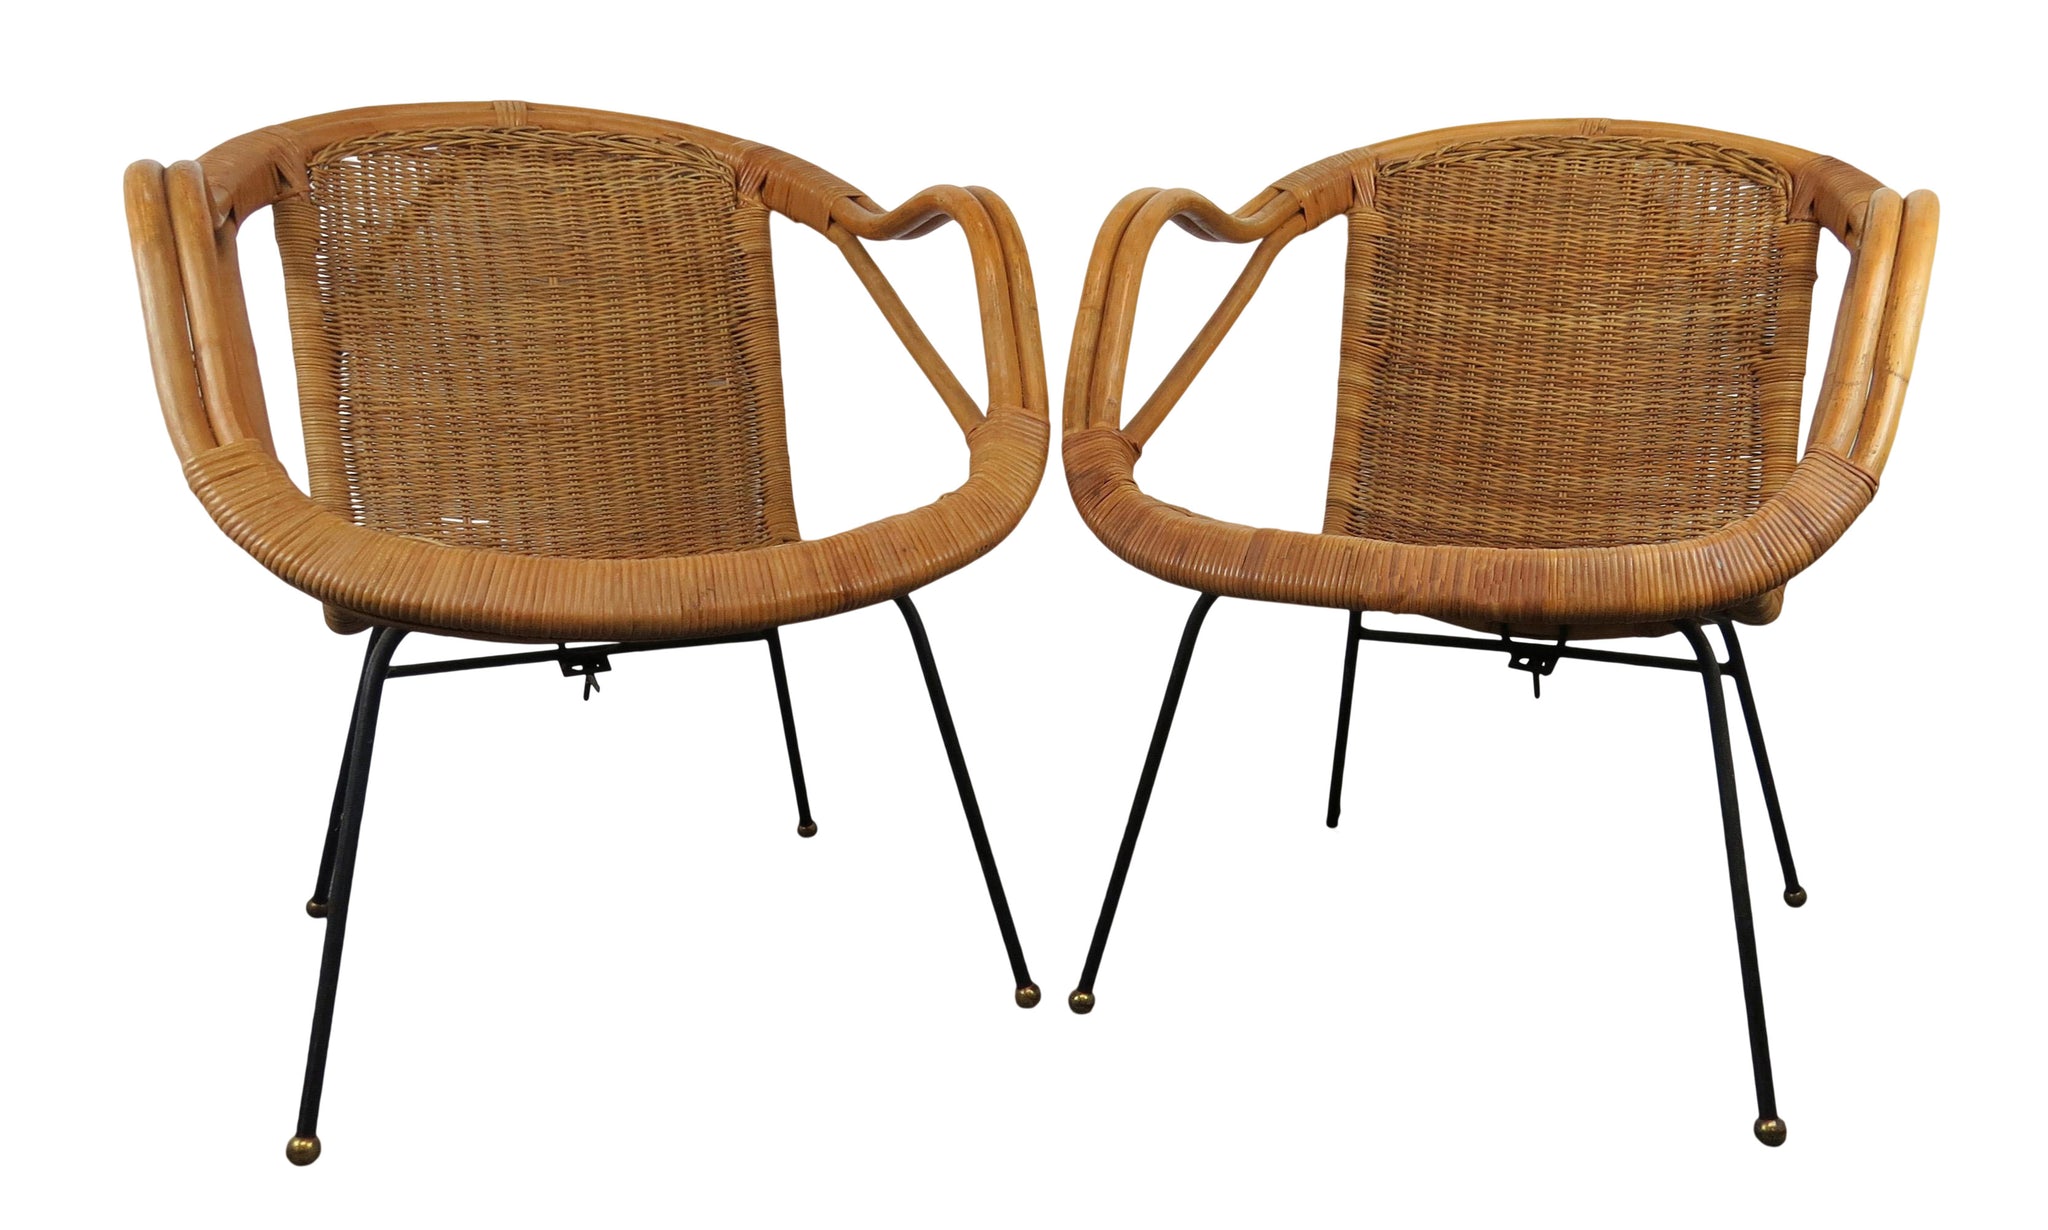 edgebrookhouse - Vintage Mid-Century Modern Rattan & Sculpted Bamboo Hoop Chairs With Iron and Brass Legs - a Pair